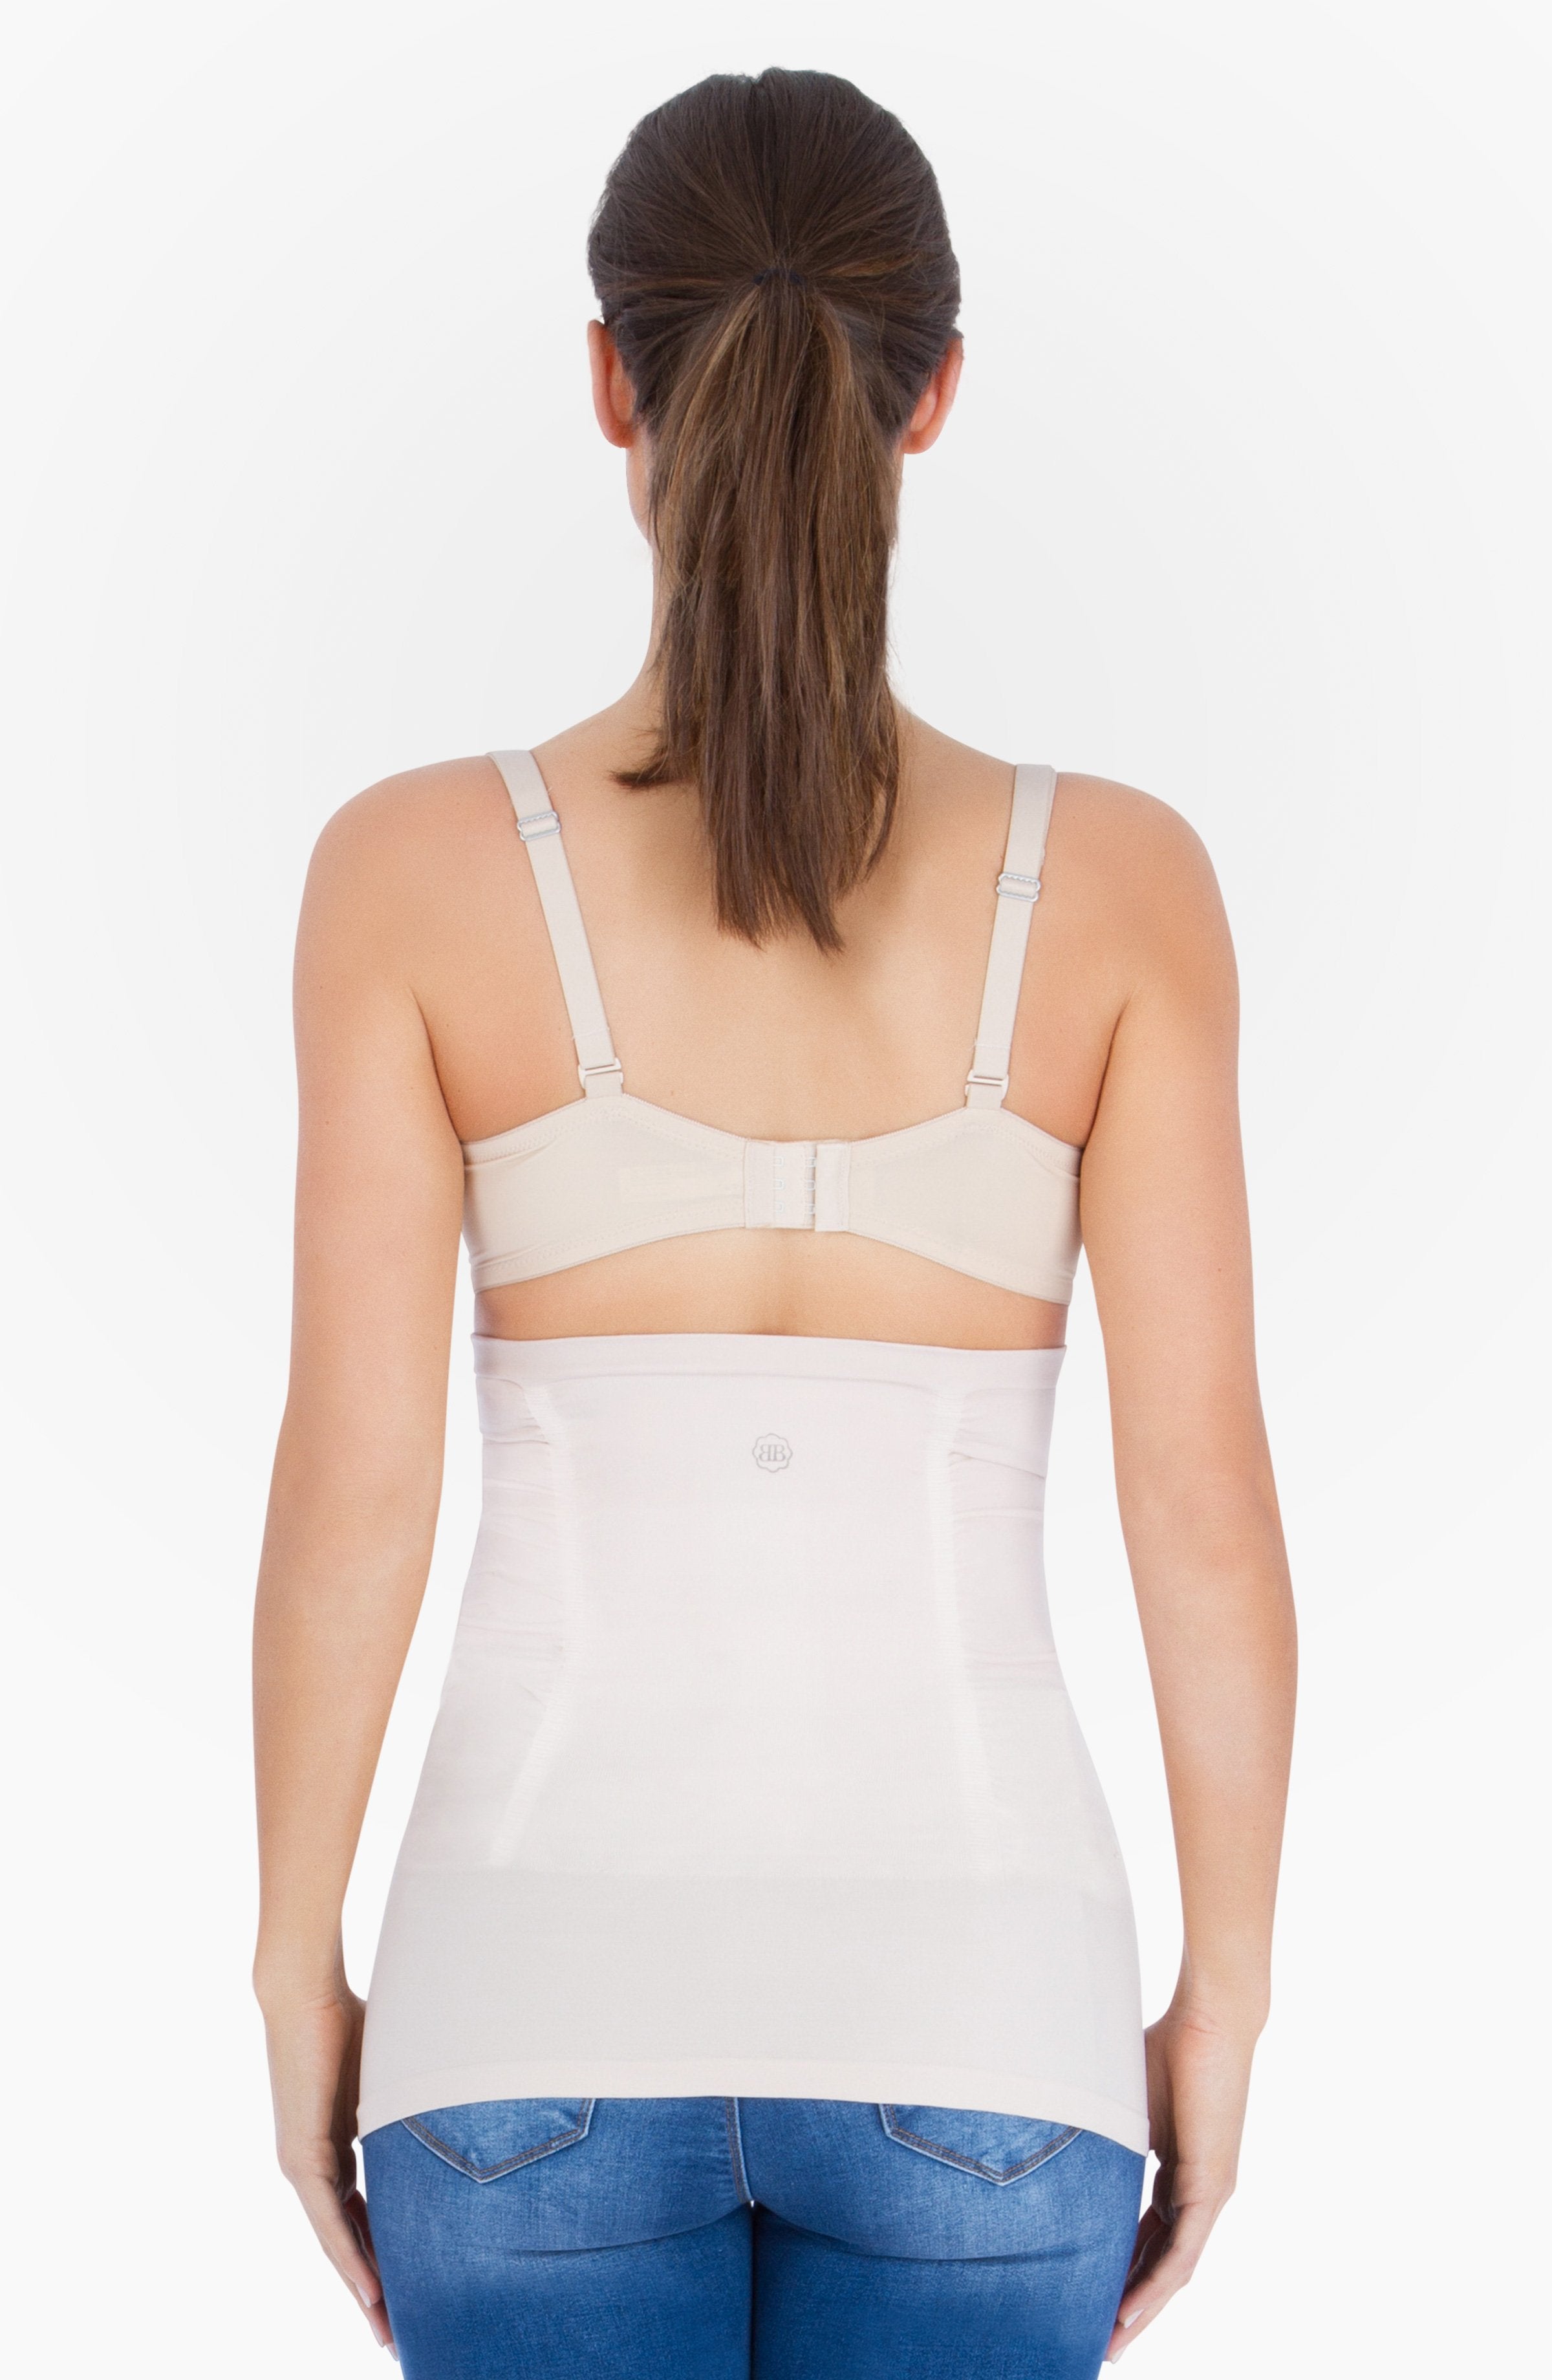 Belly Bandit Luxe Belly Wrap Extender in Nude